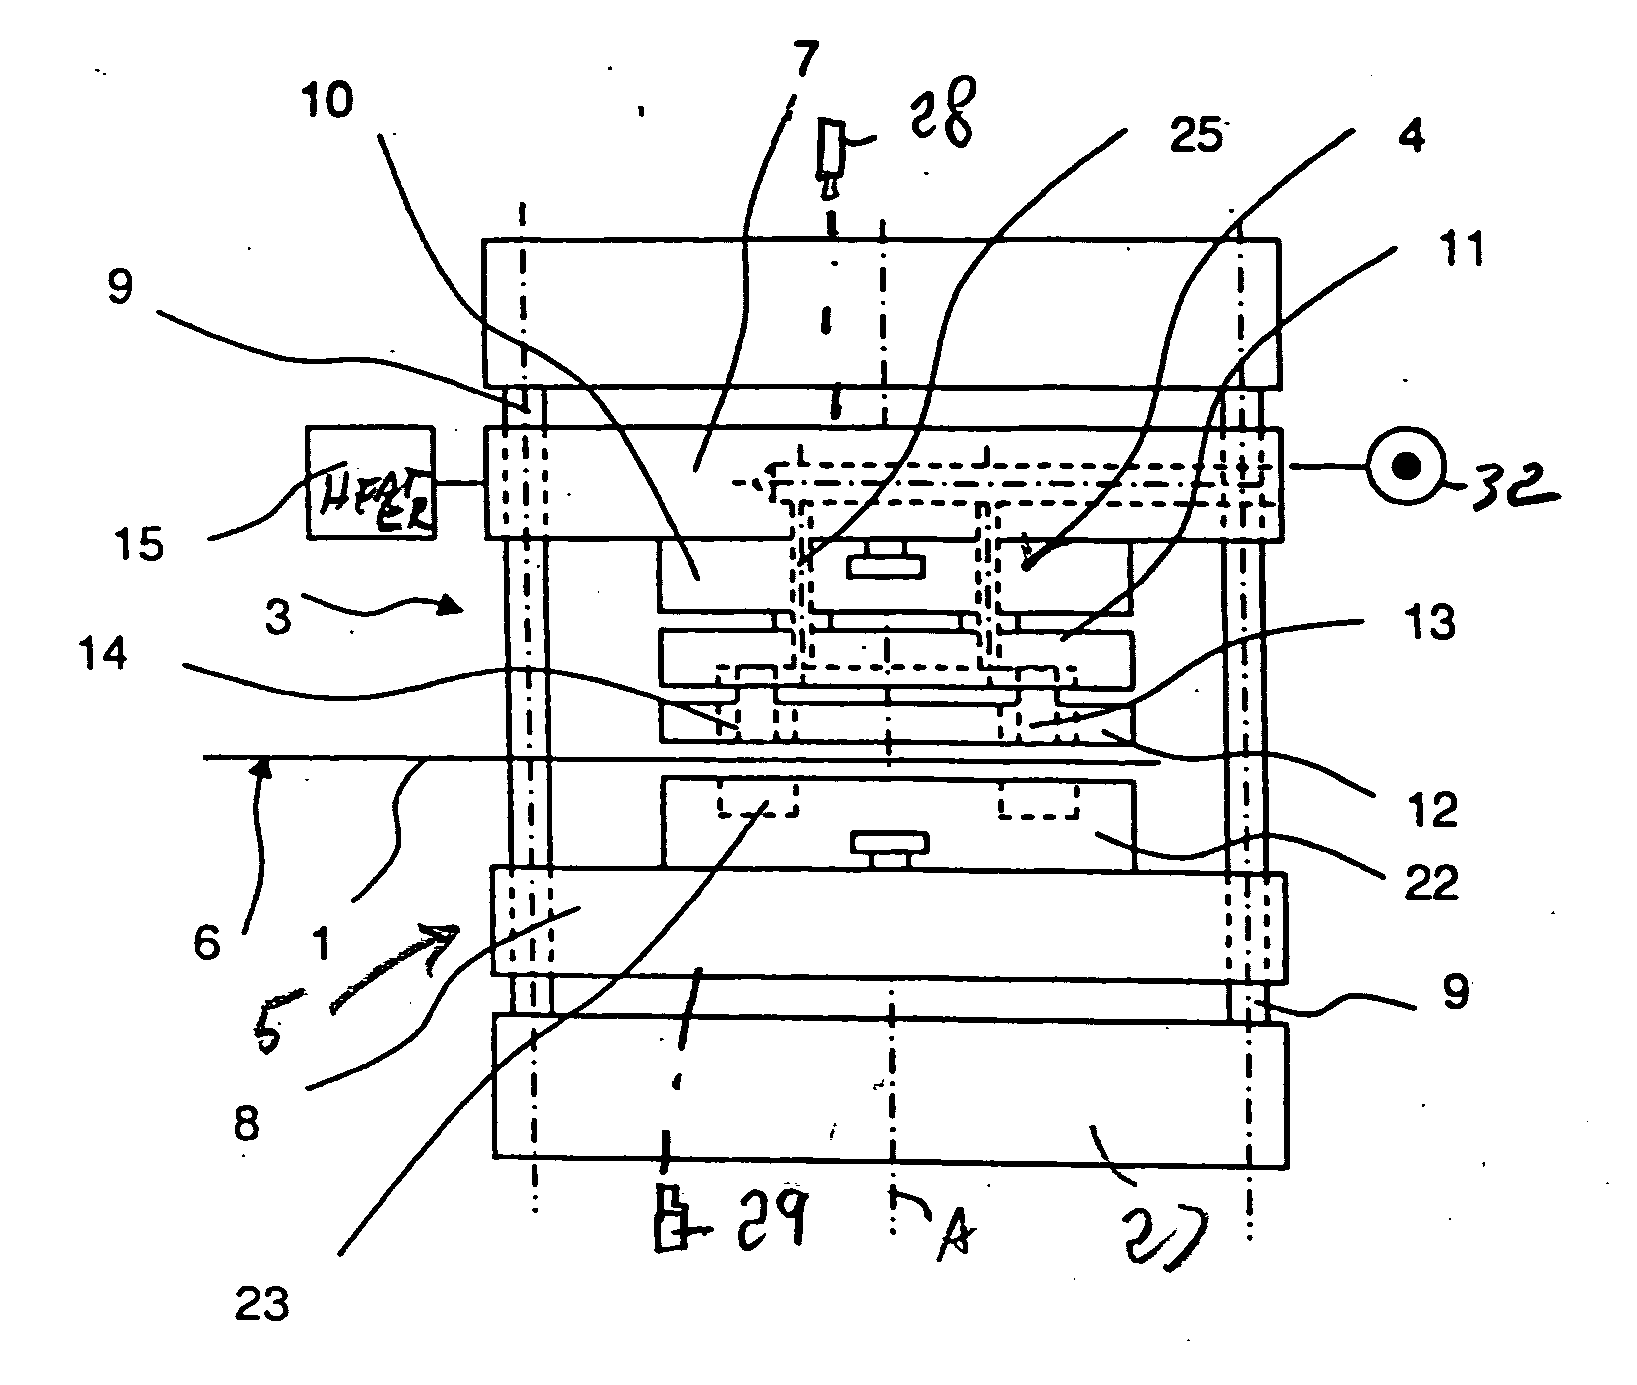 Apparatus for deep drawing a thermoplastic foil